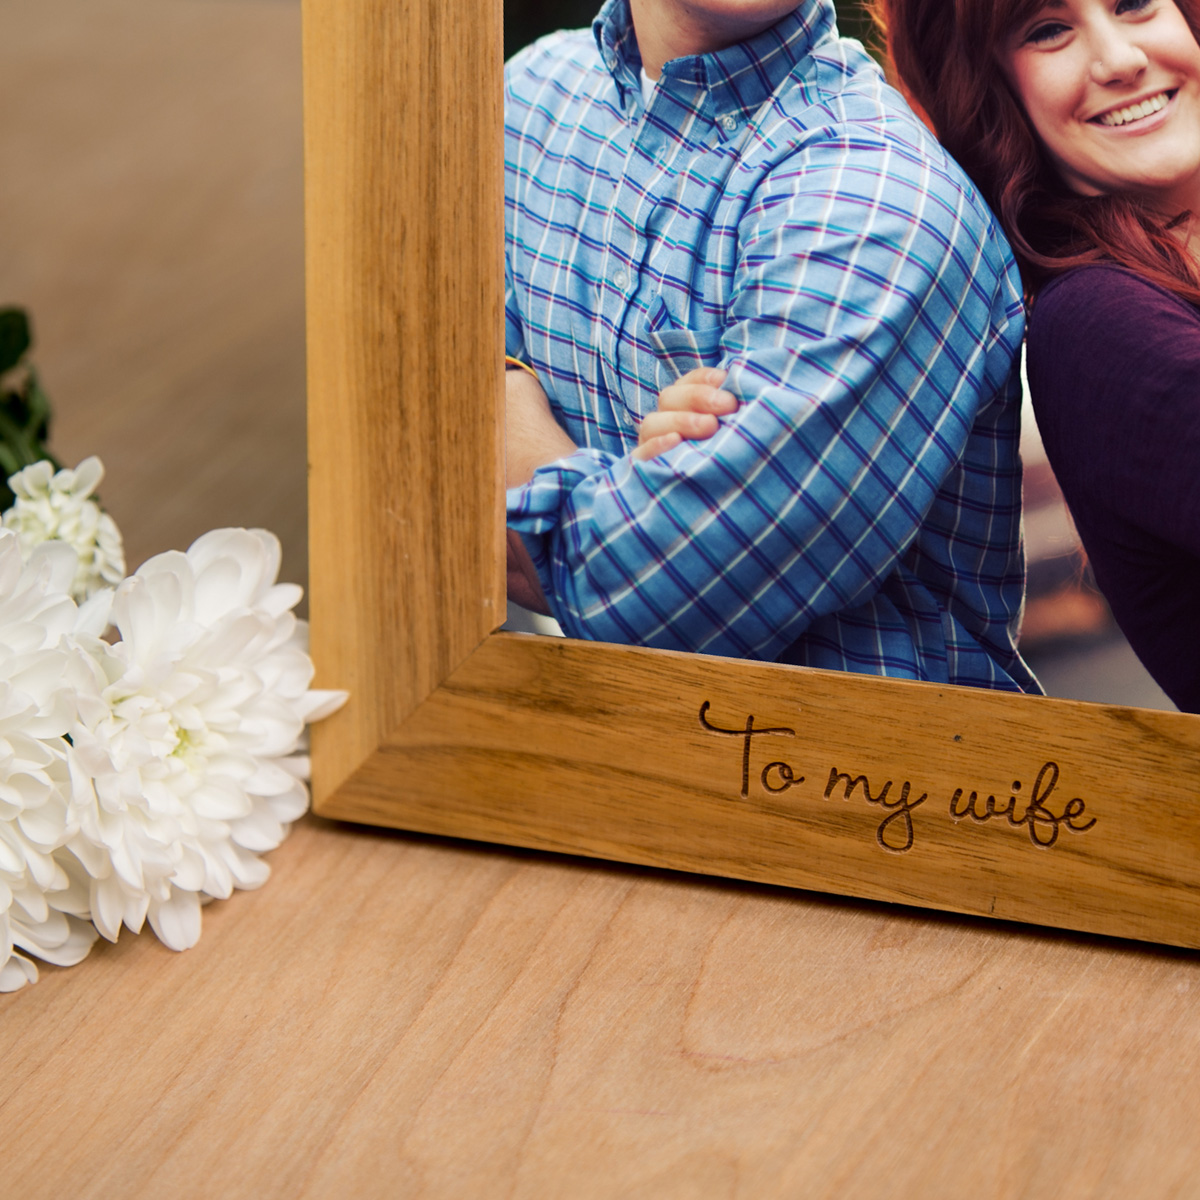 Personalised Wooden Photo Frame - Any Message